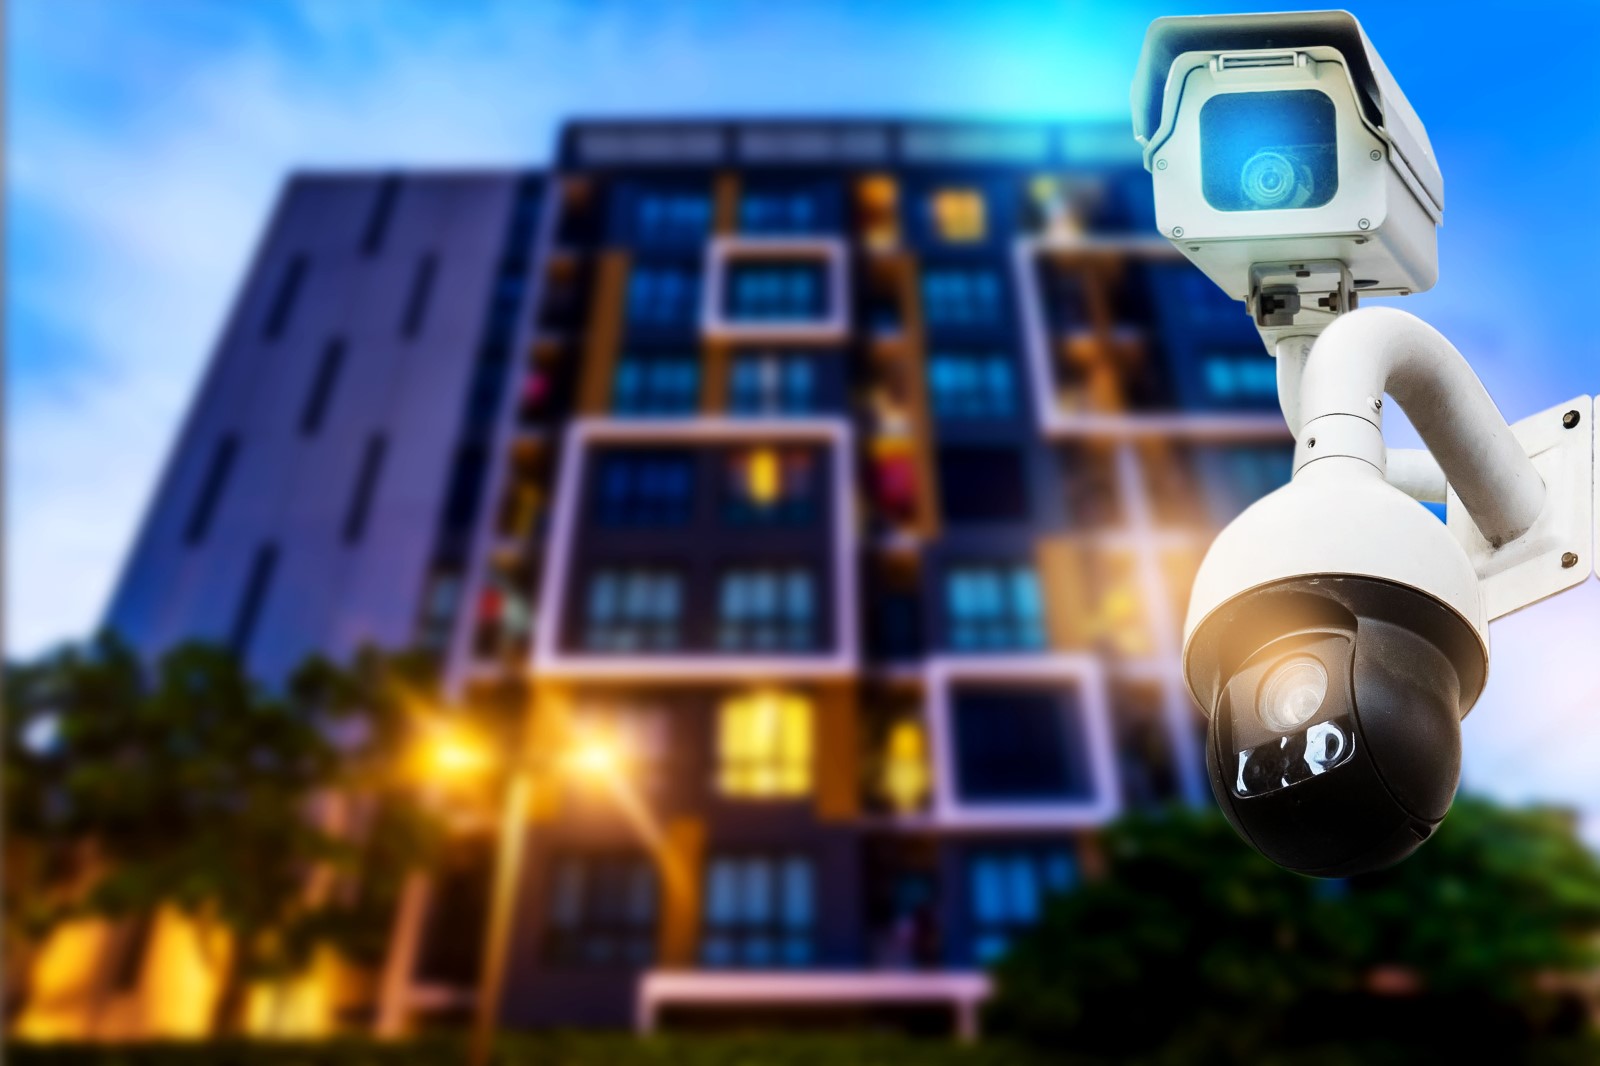 security cameras outside of an apartment complex protect the perimeter of the property